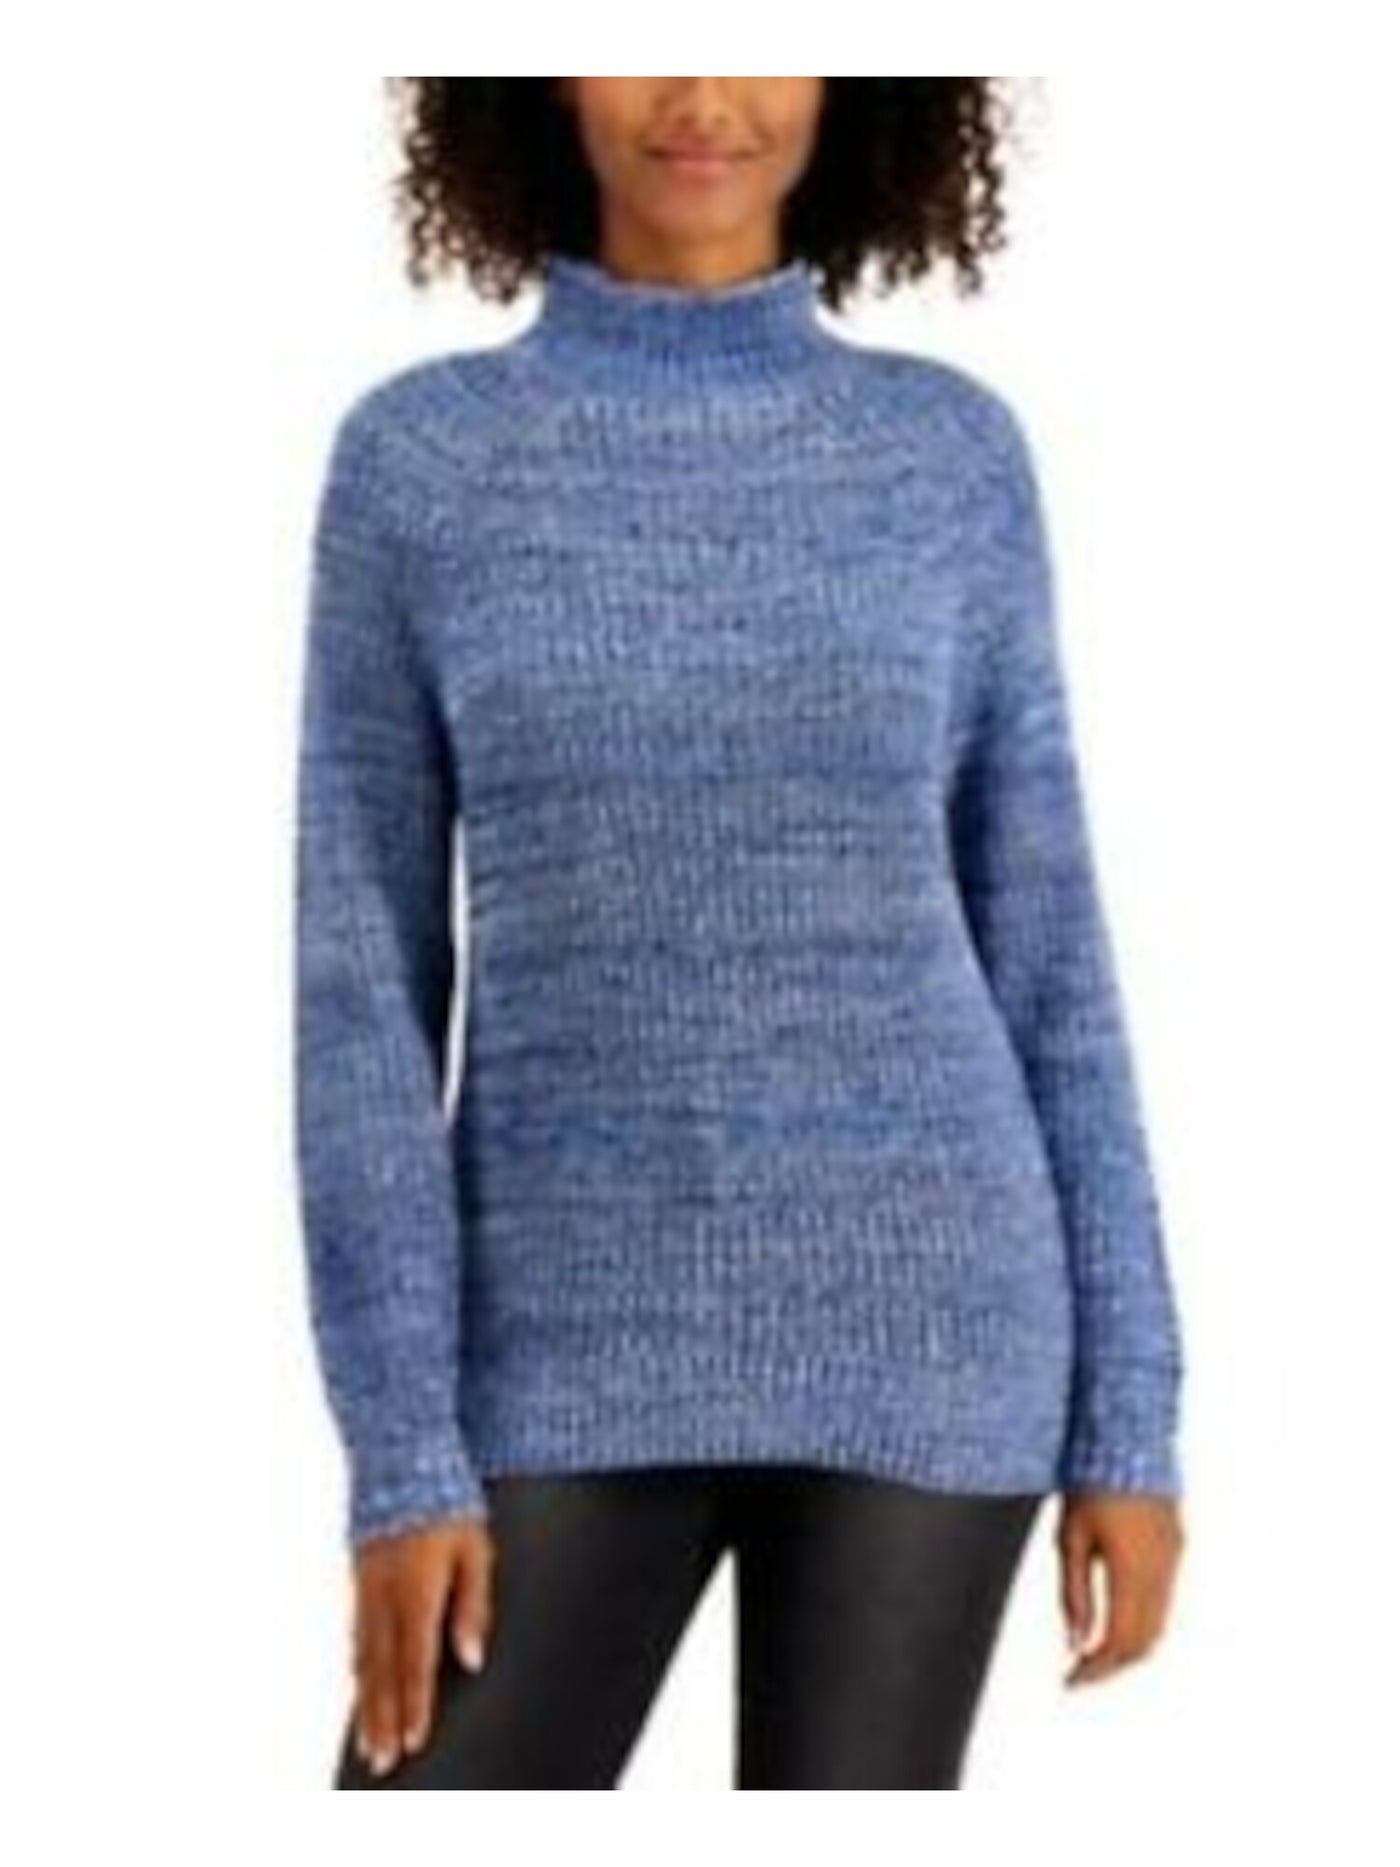 STYLE & COMPANY Womens Blue Textured Funnel Neck Raglan Sleeve Sweater S